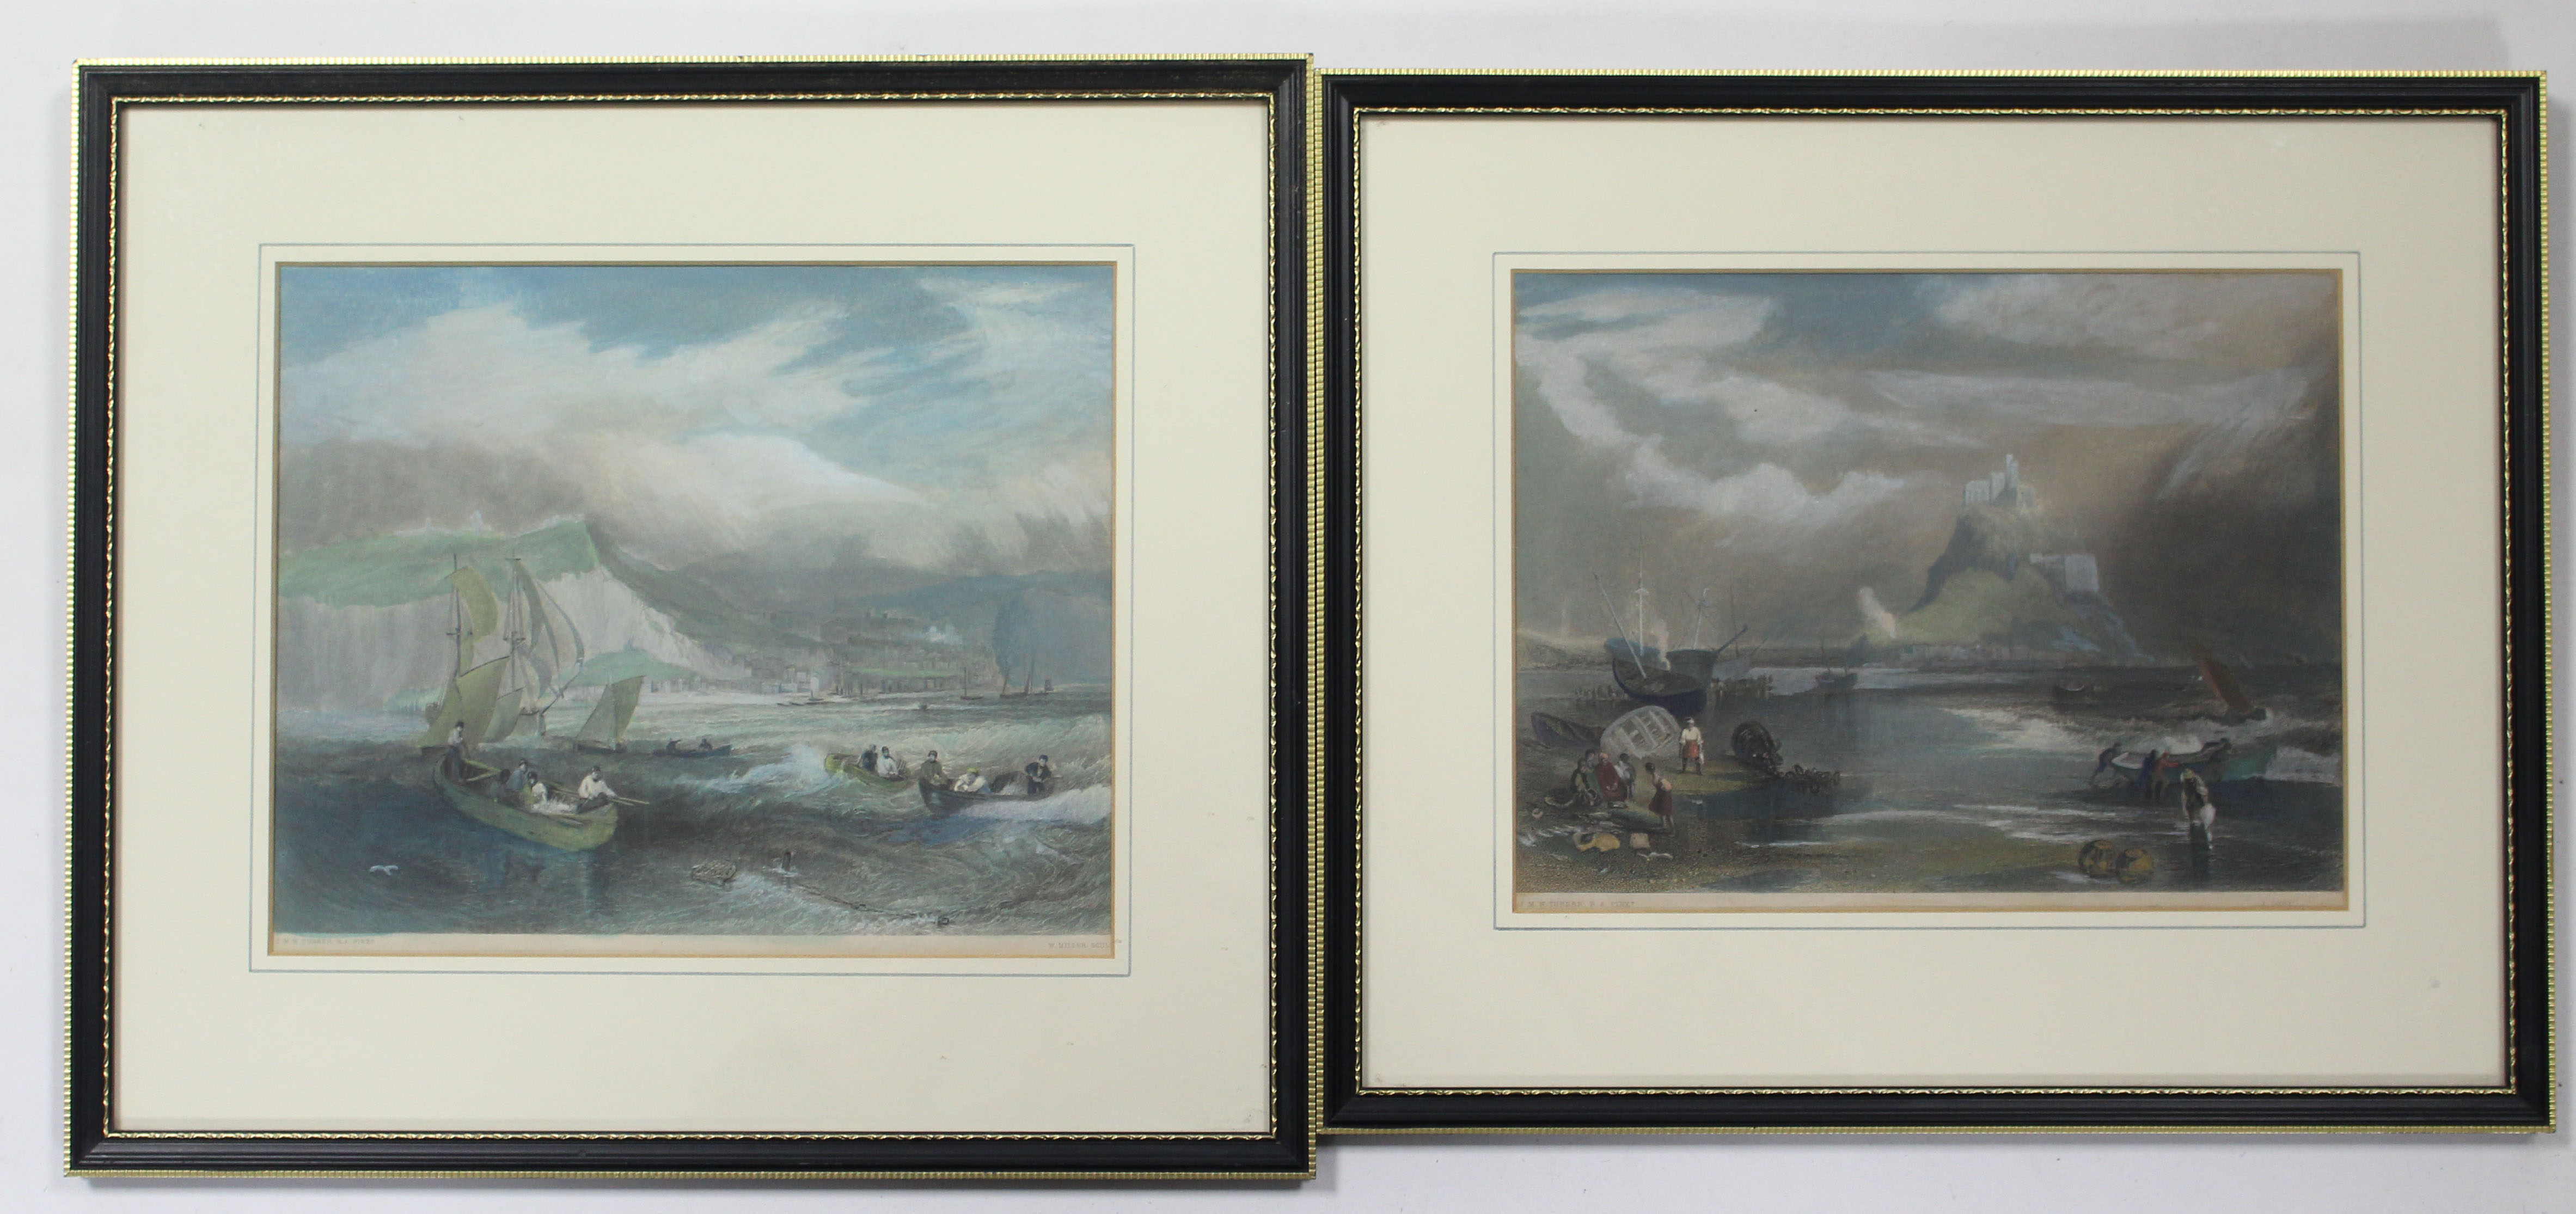 A pair of coloured engravings after J.M.W. Turner – coastal scenes; 7¼” x 9½”, each in glazed